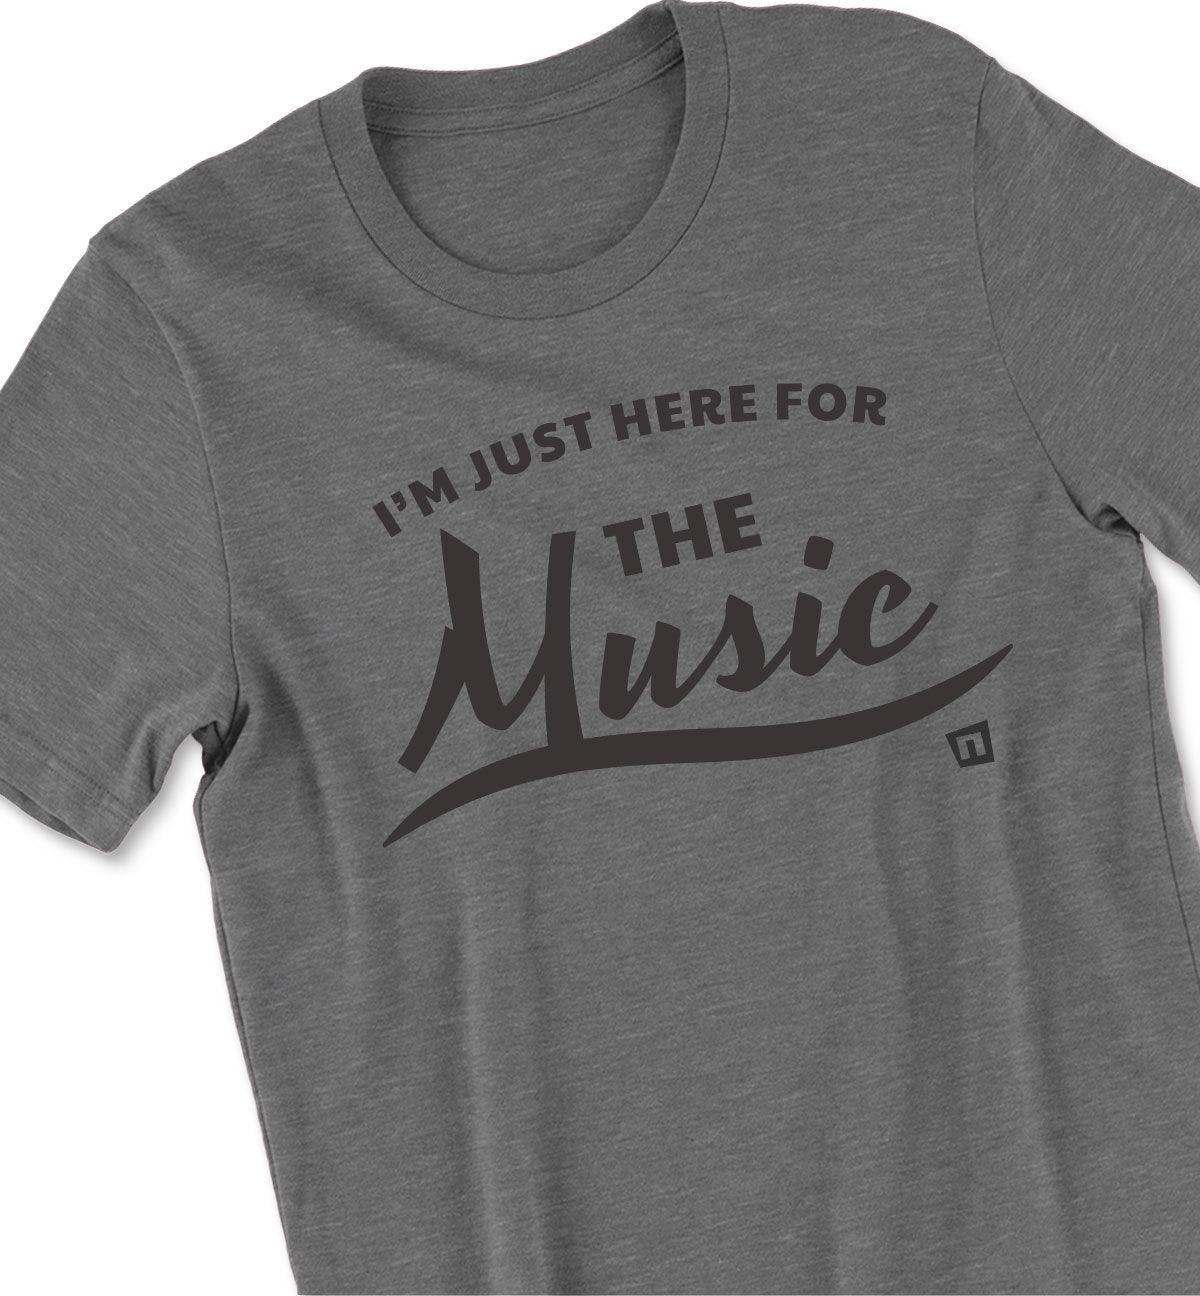 'I'm Just Here for the Music' Tshirt - NOGGINHED